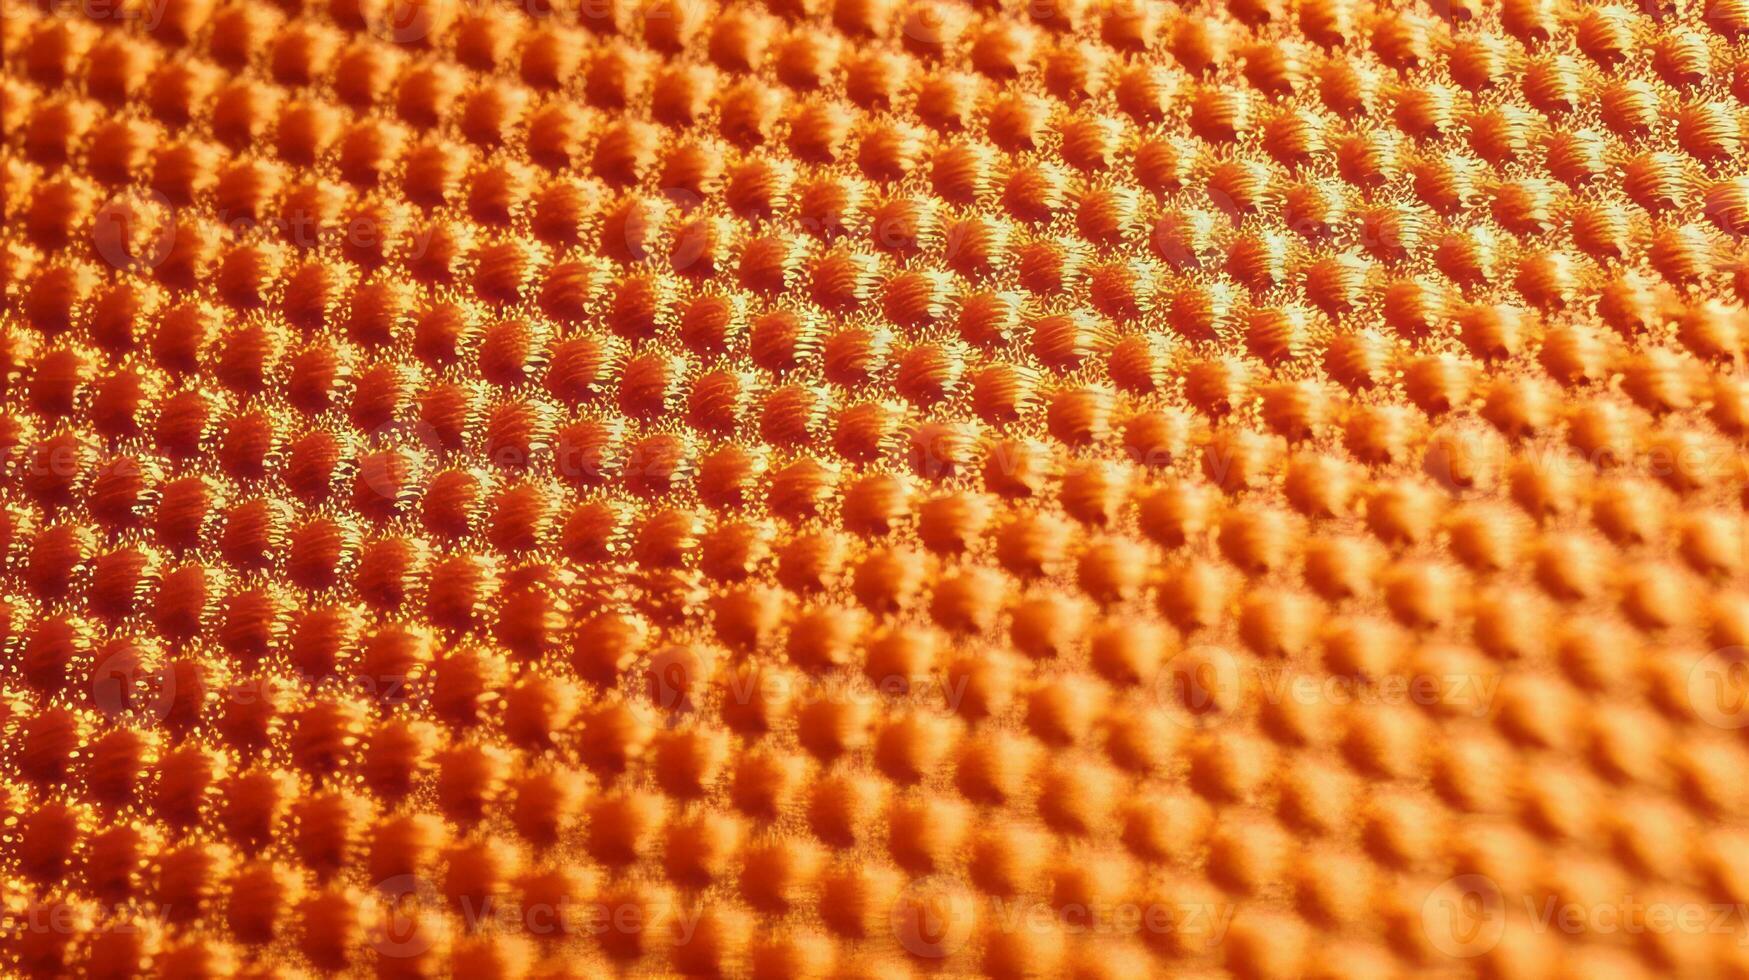 Orange soccer fabric texture with air mesh. Sportswear background photo